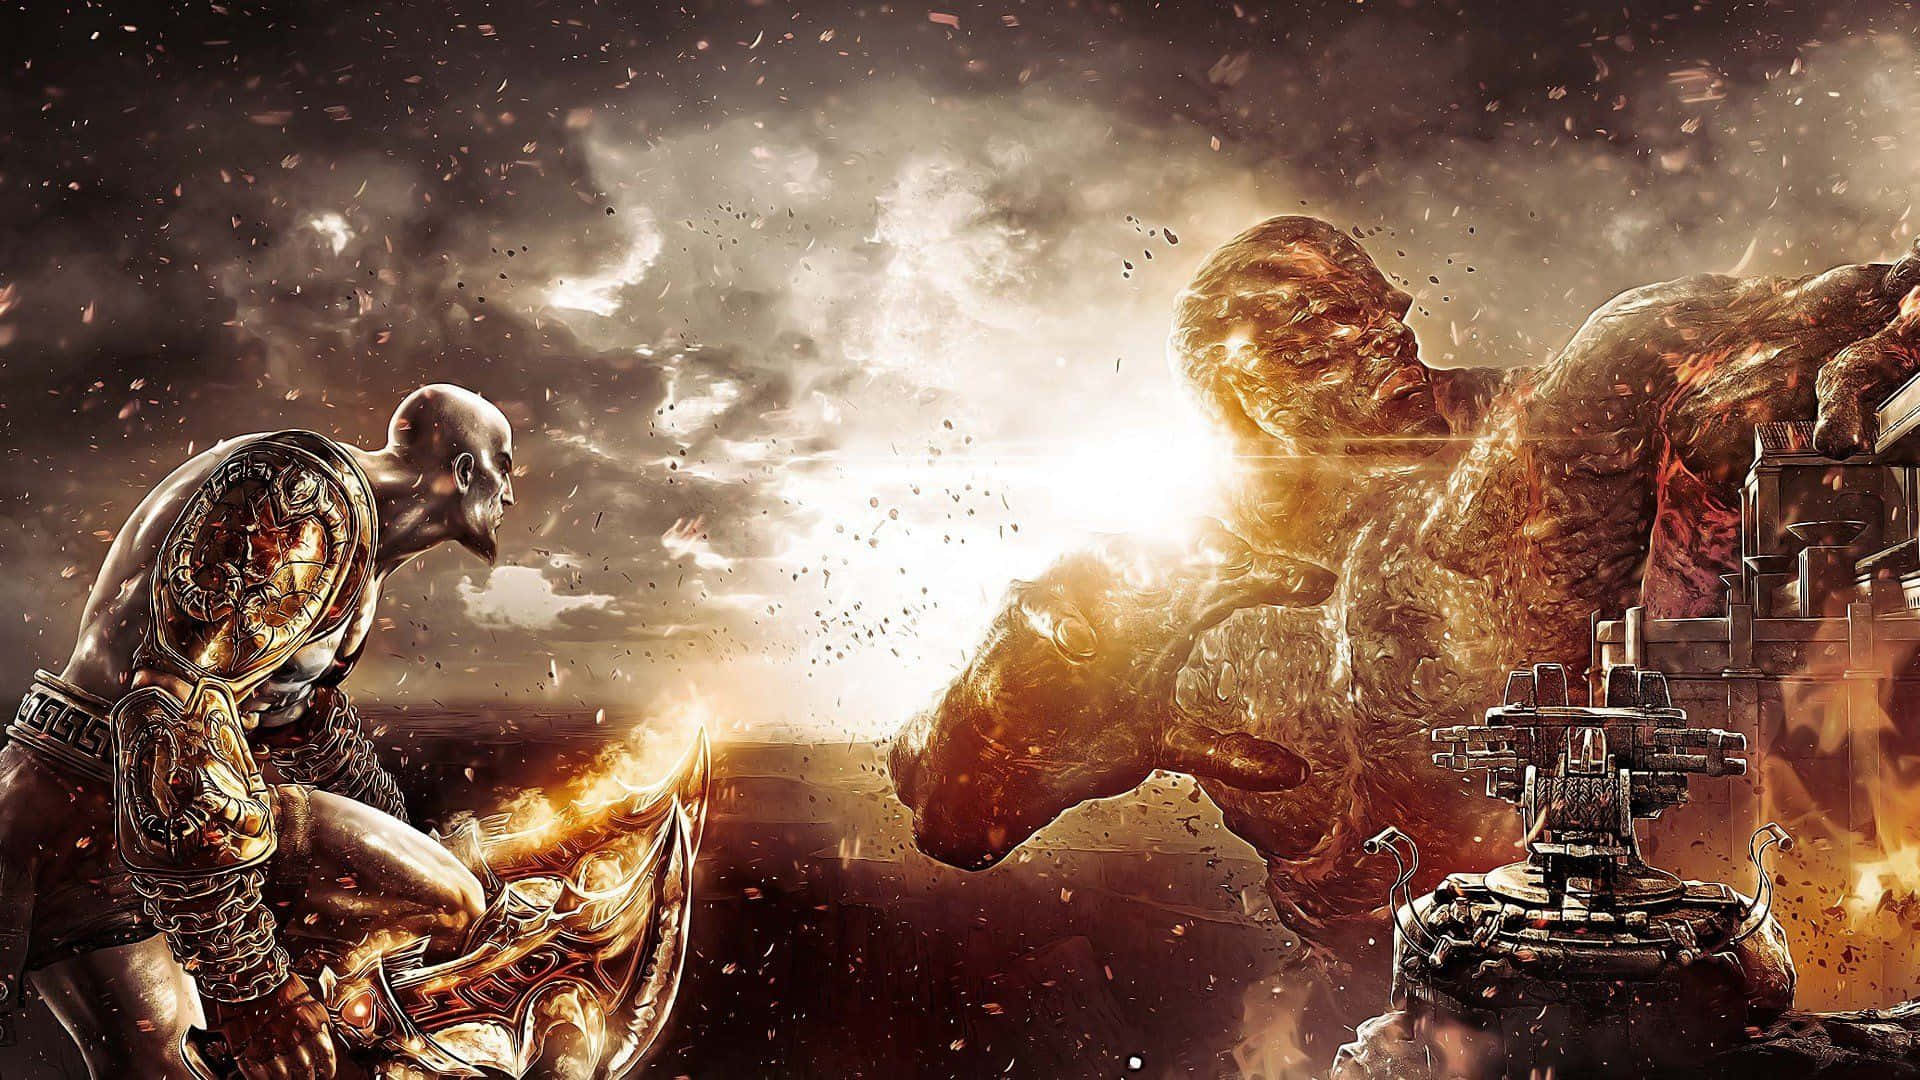 Kratos engages in combat using his signature weapons and powers Wallpaper